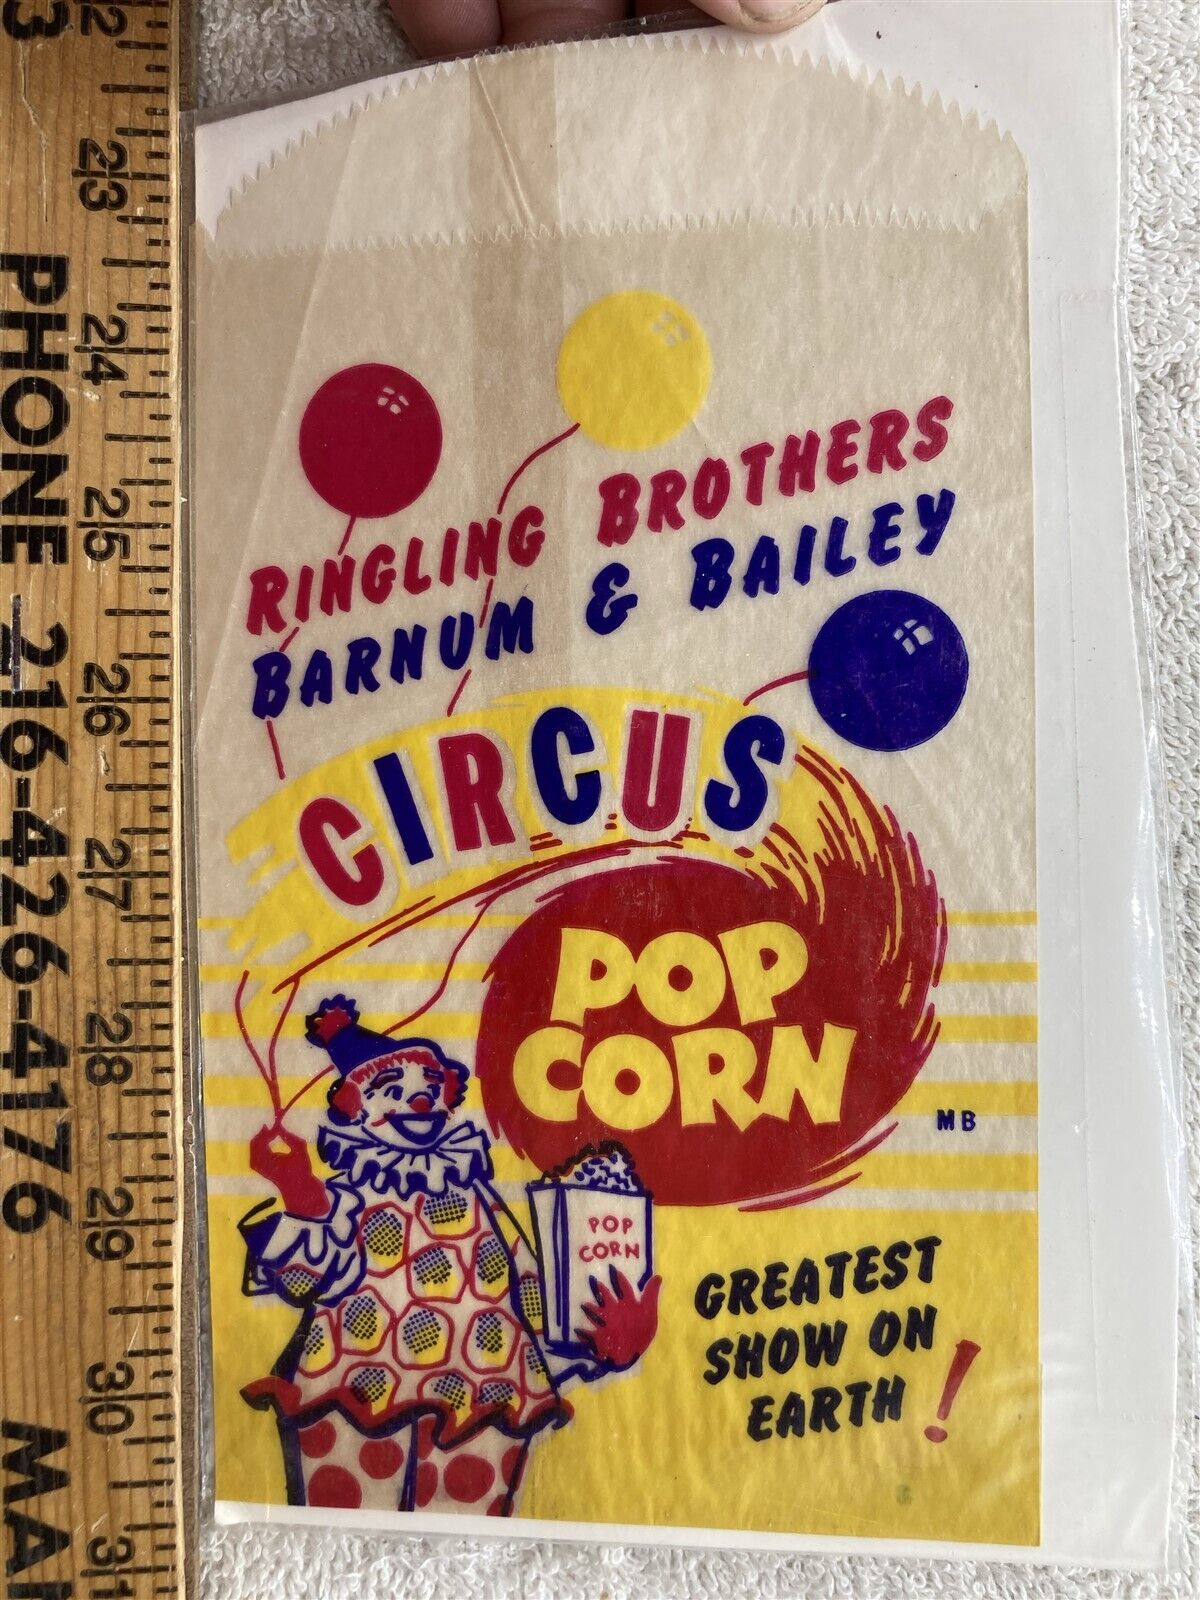 1950s 1960s Ringling Brothers Barnum & Bailey Circus Popcorn Bag Vintage